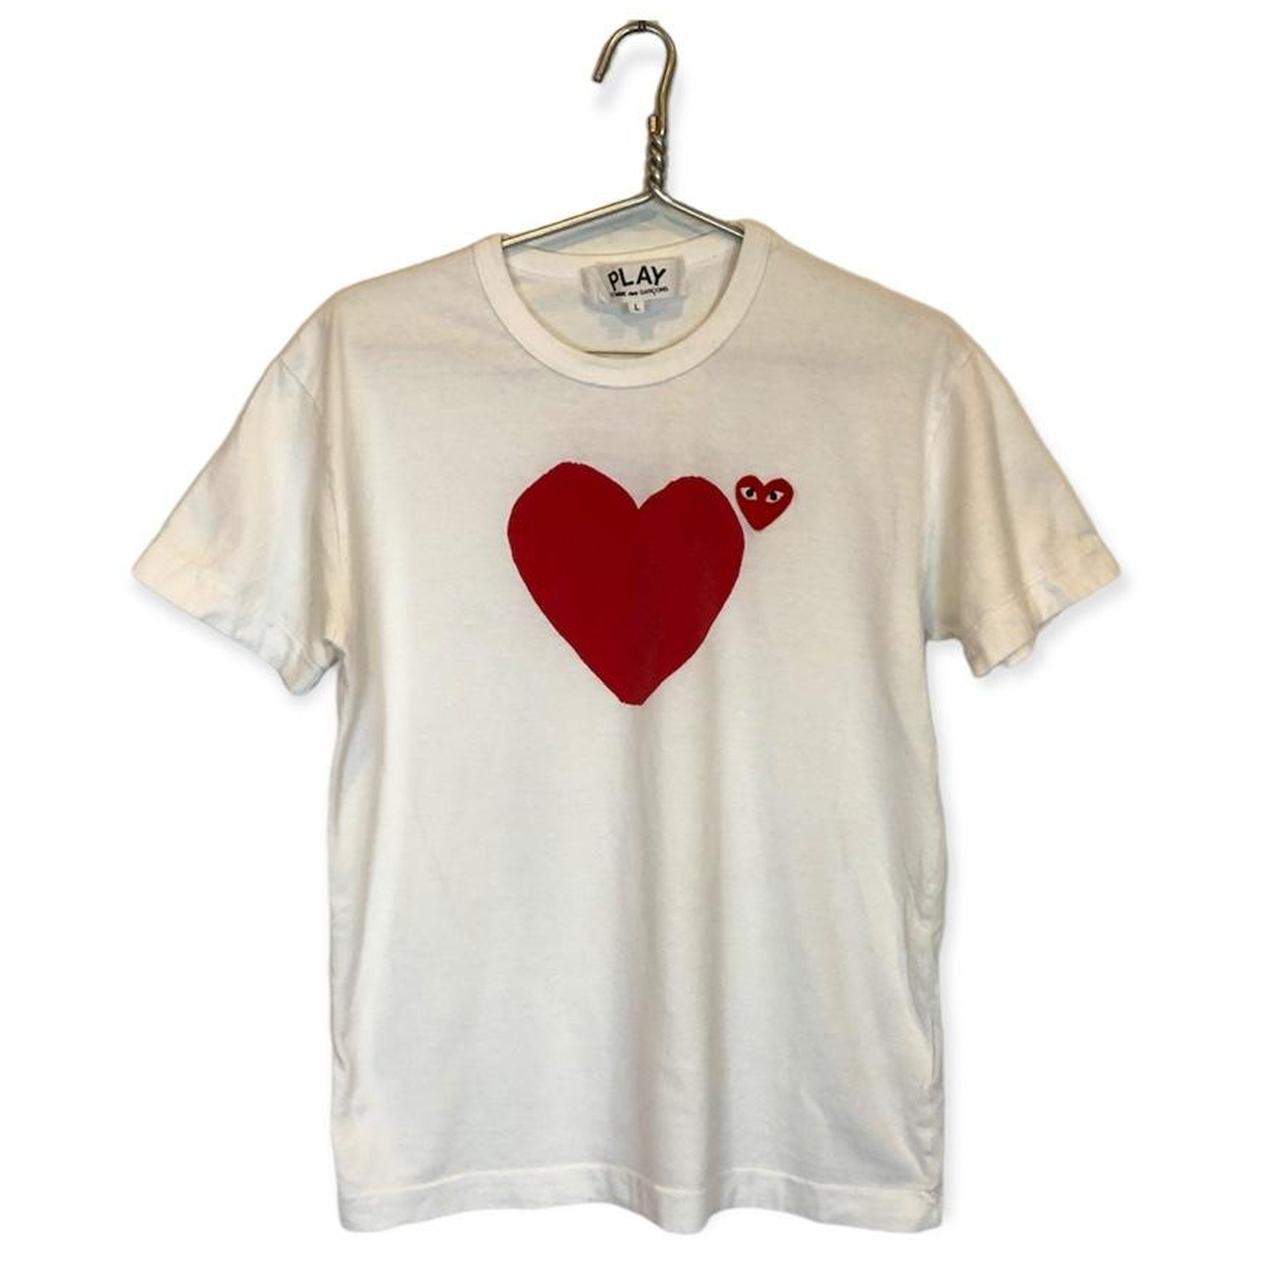 Comme des Garçons Play Women's White and Red T-shirt